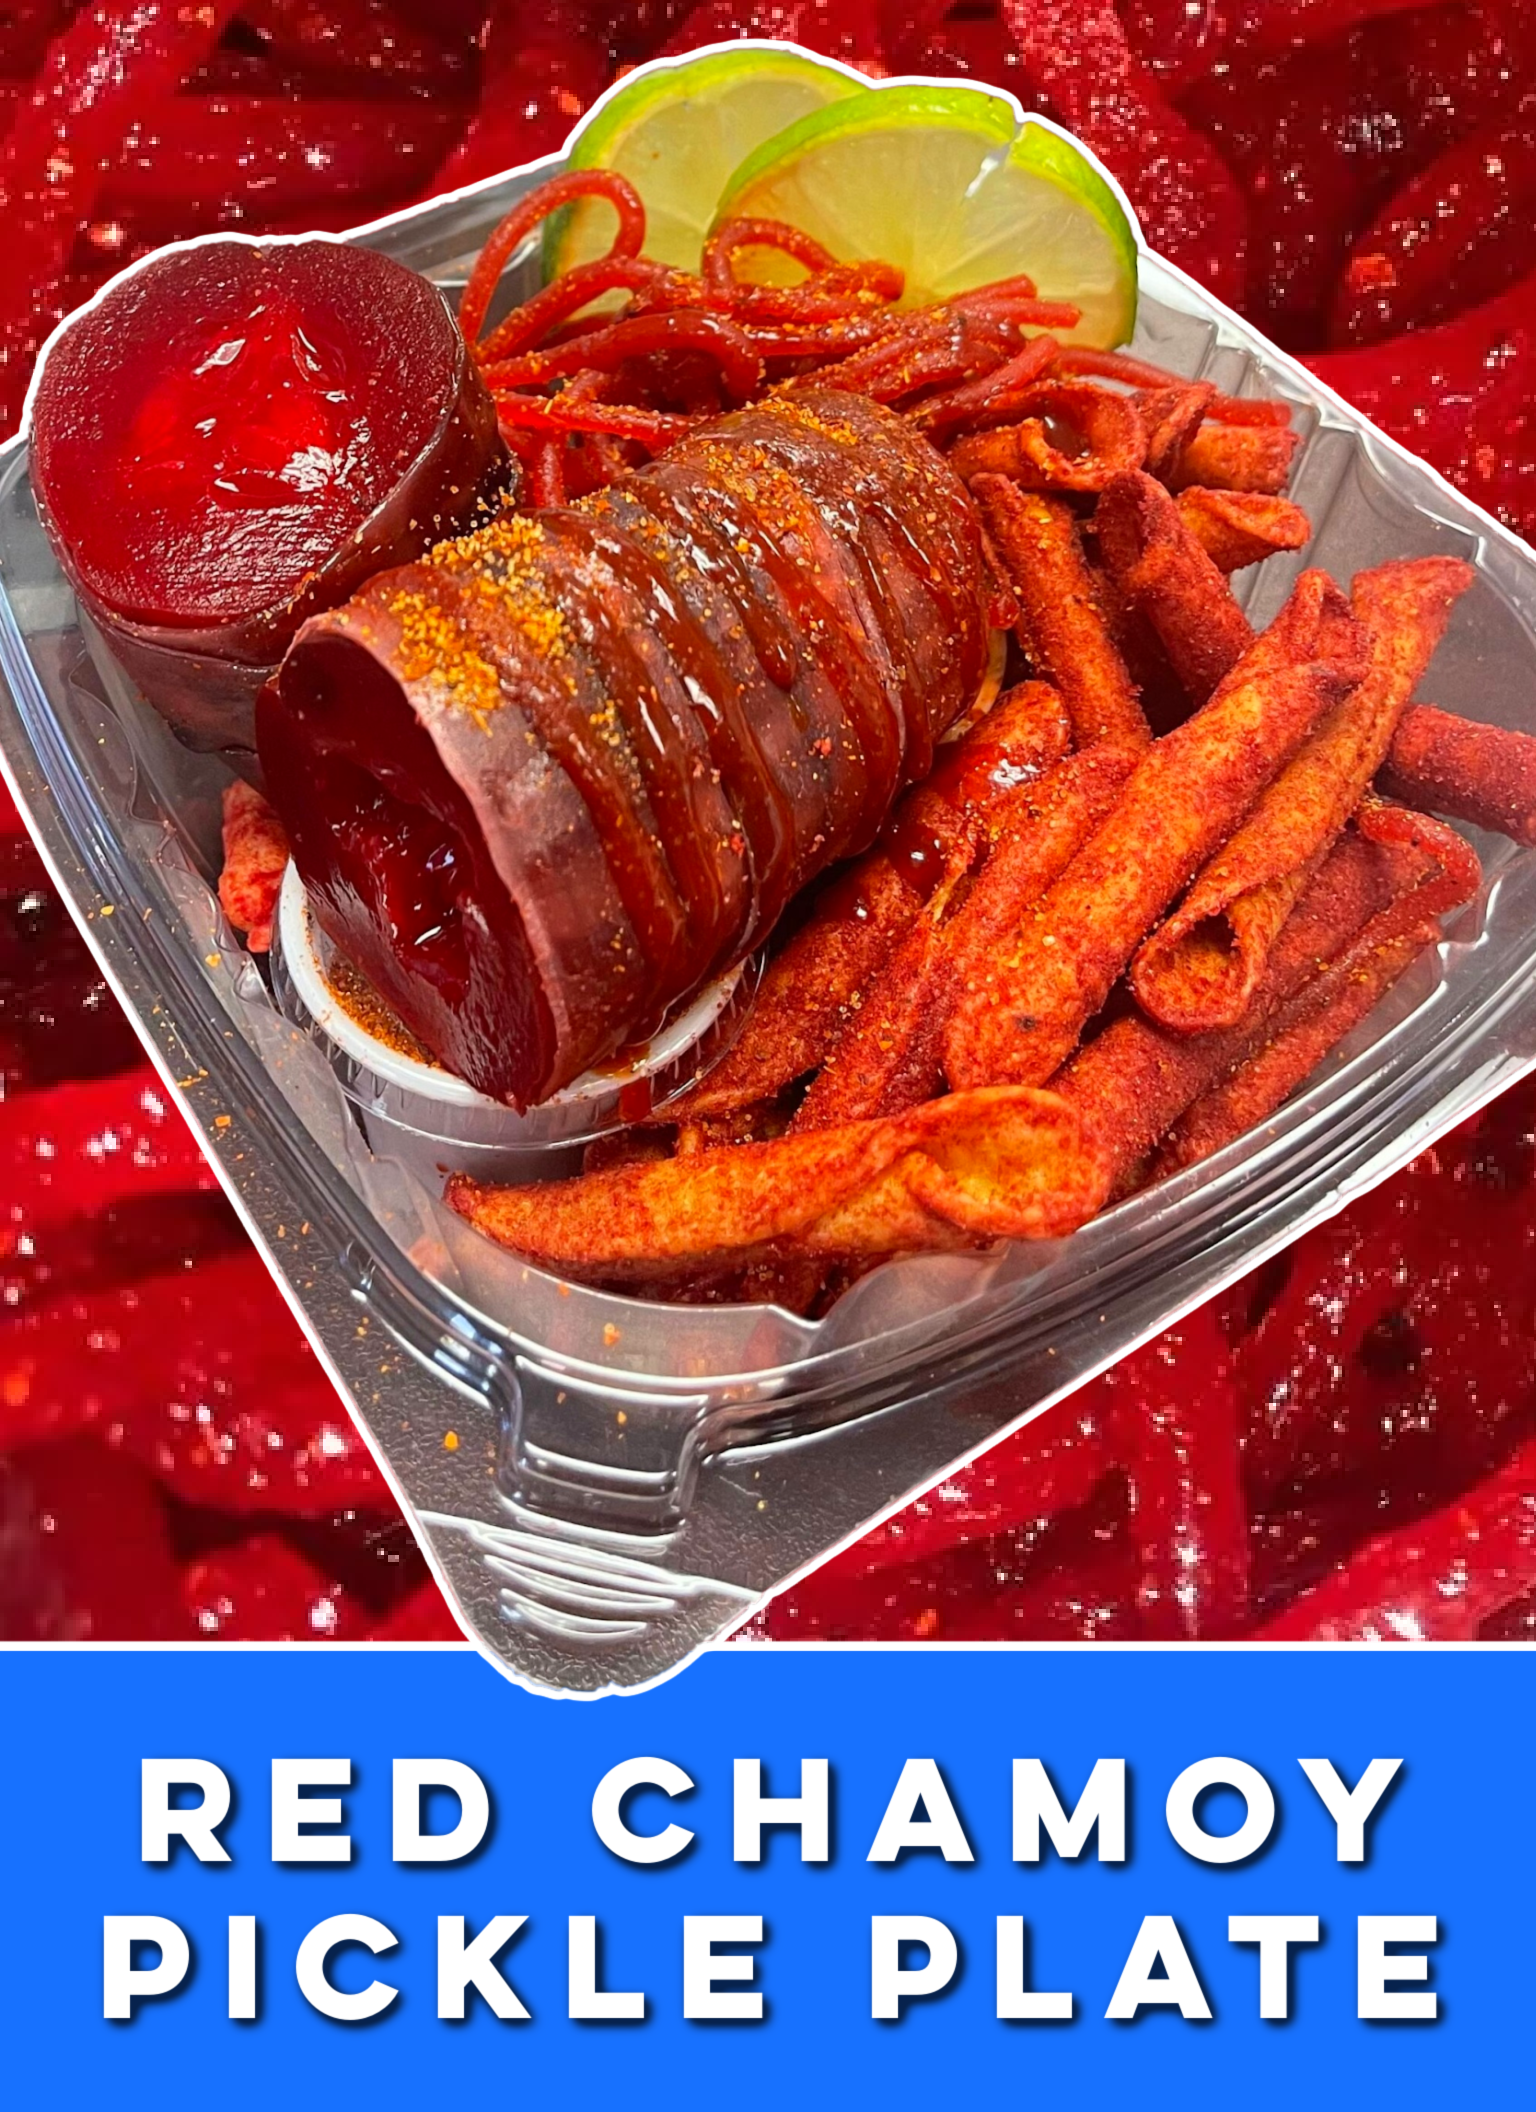 Red Chamoy Pickle Plate